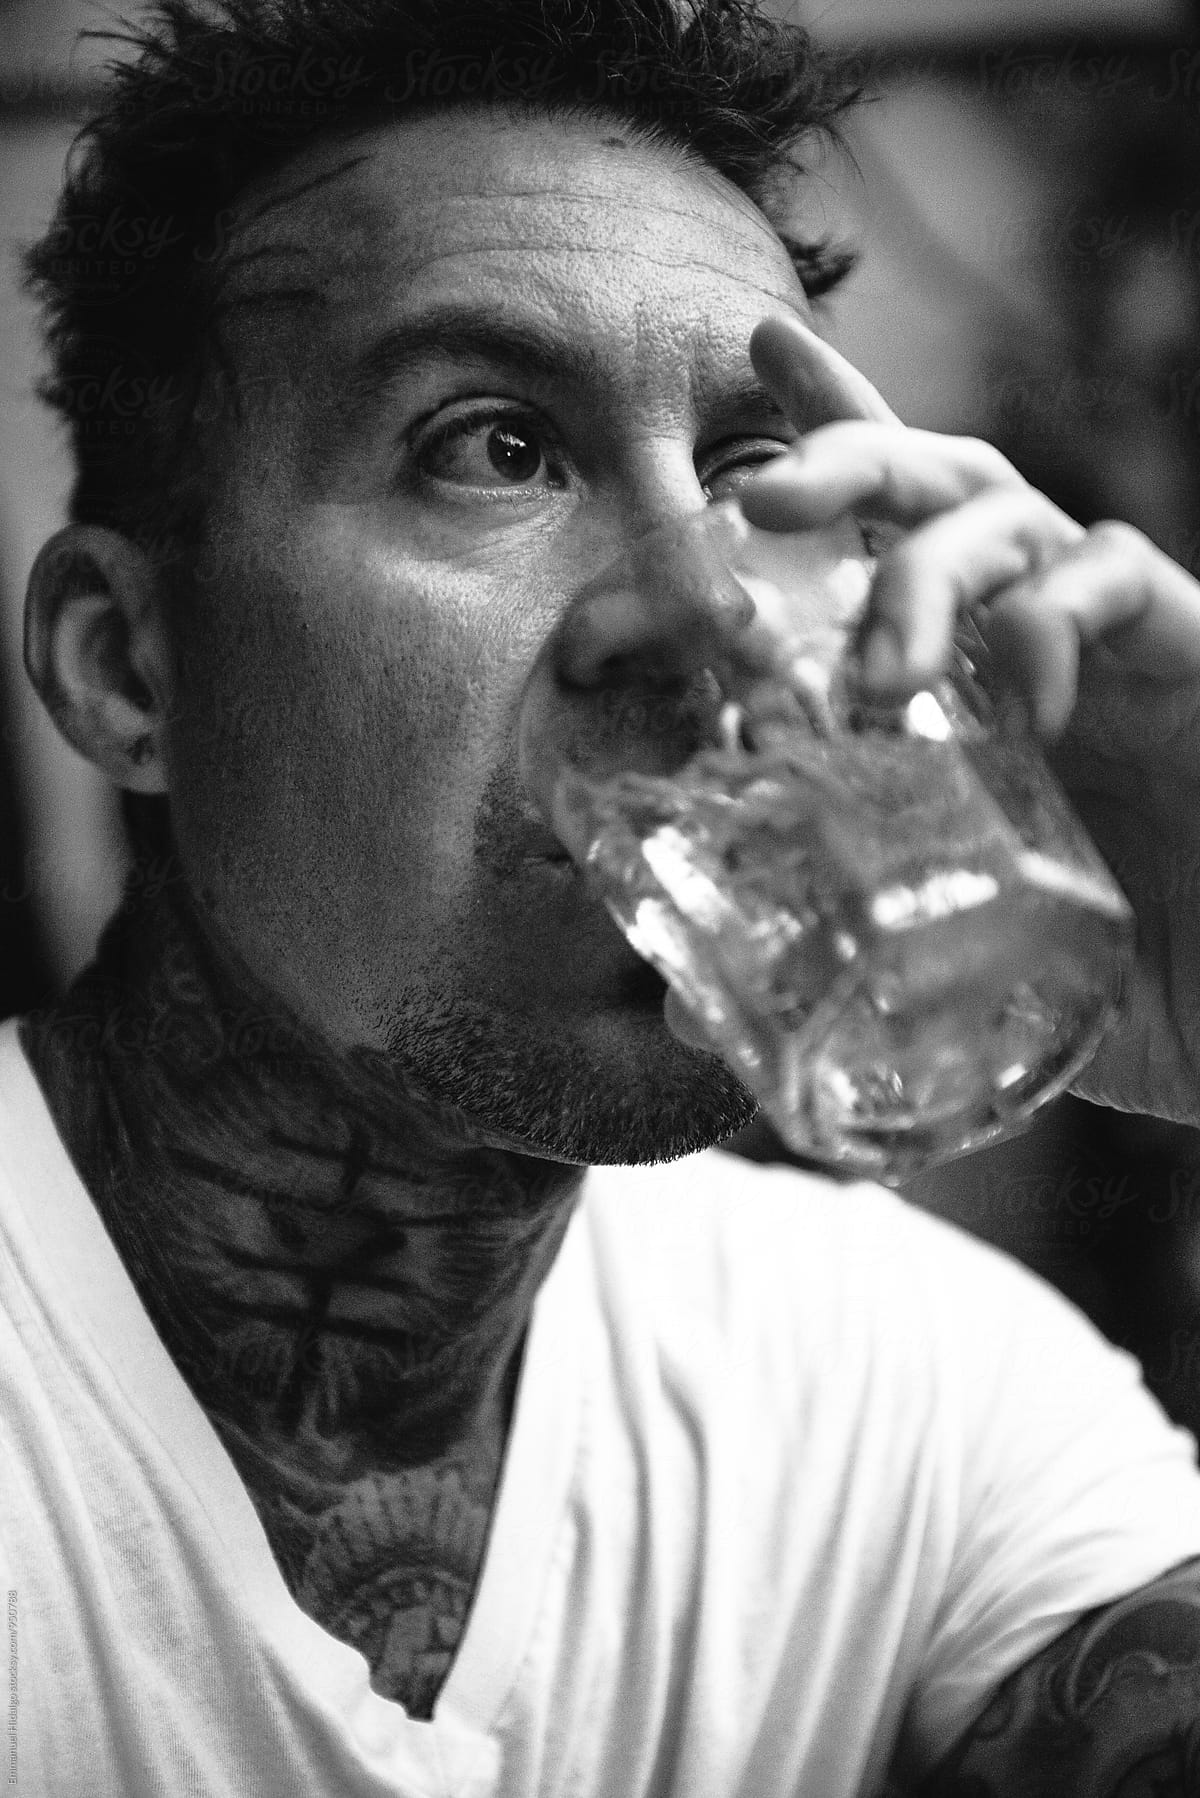 Man having a strong drink - in black and white